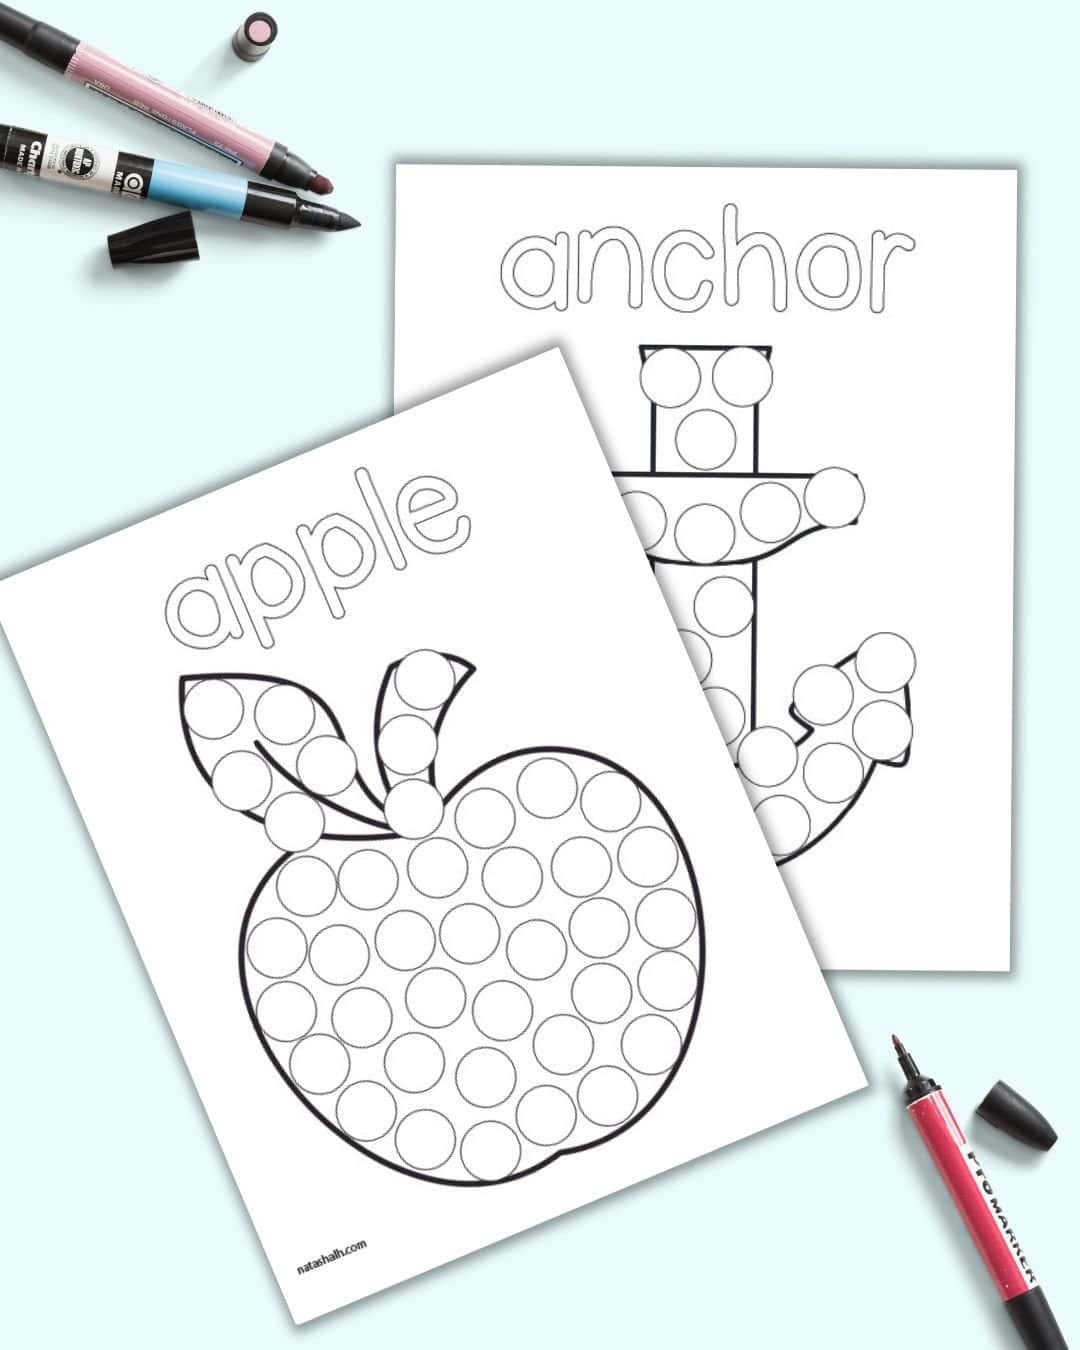 A preview of two letter a dot marker pages. One shows an apple and the other an anchor.